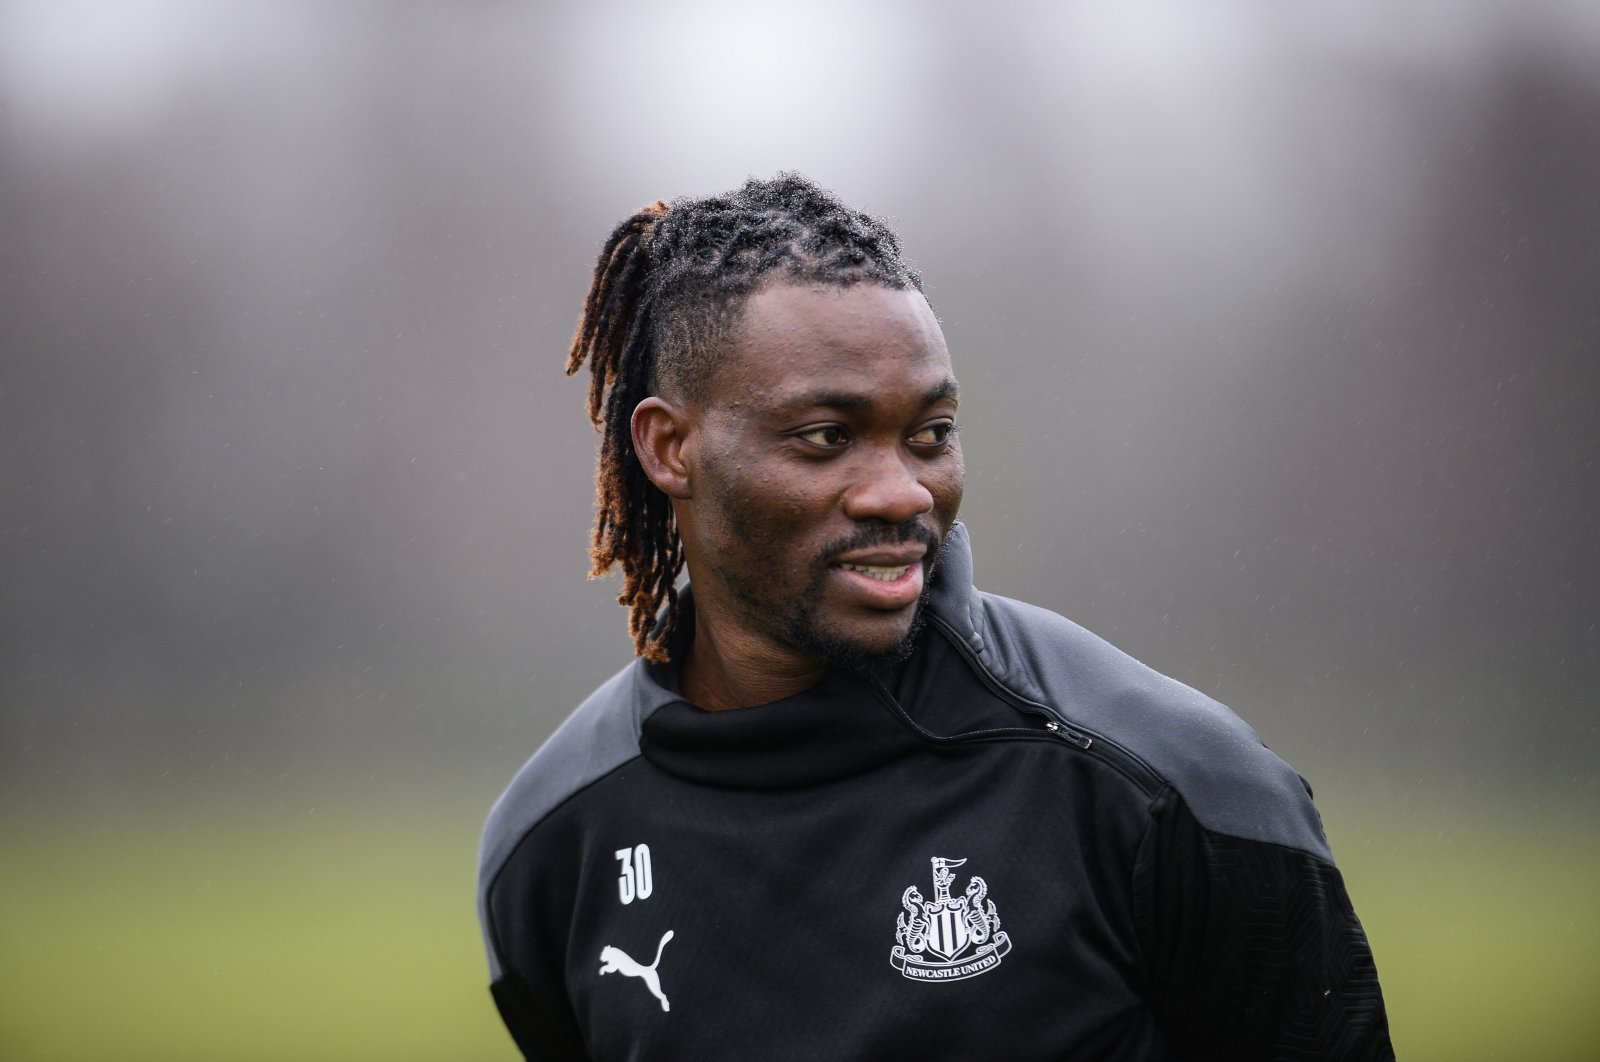 File photo of Christian Atsu during the Newcastle United Training Session at the Newcastle United Training Center, Newcastle, UK., Jan. 28, 2021. (Getty Images Photo)